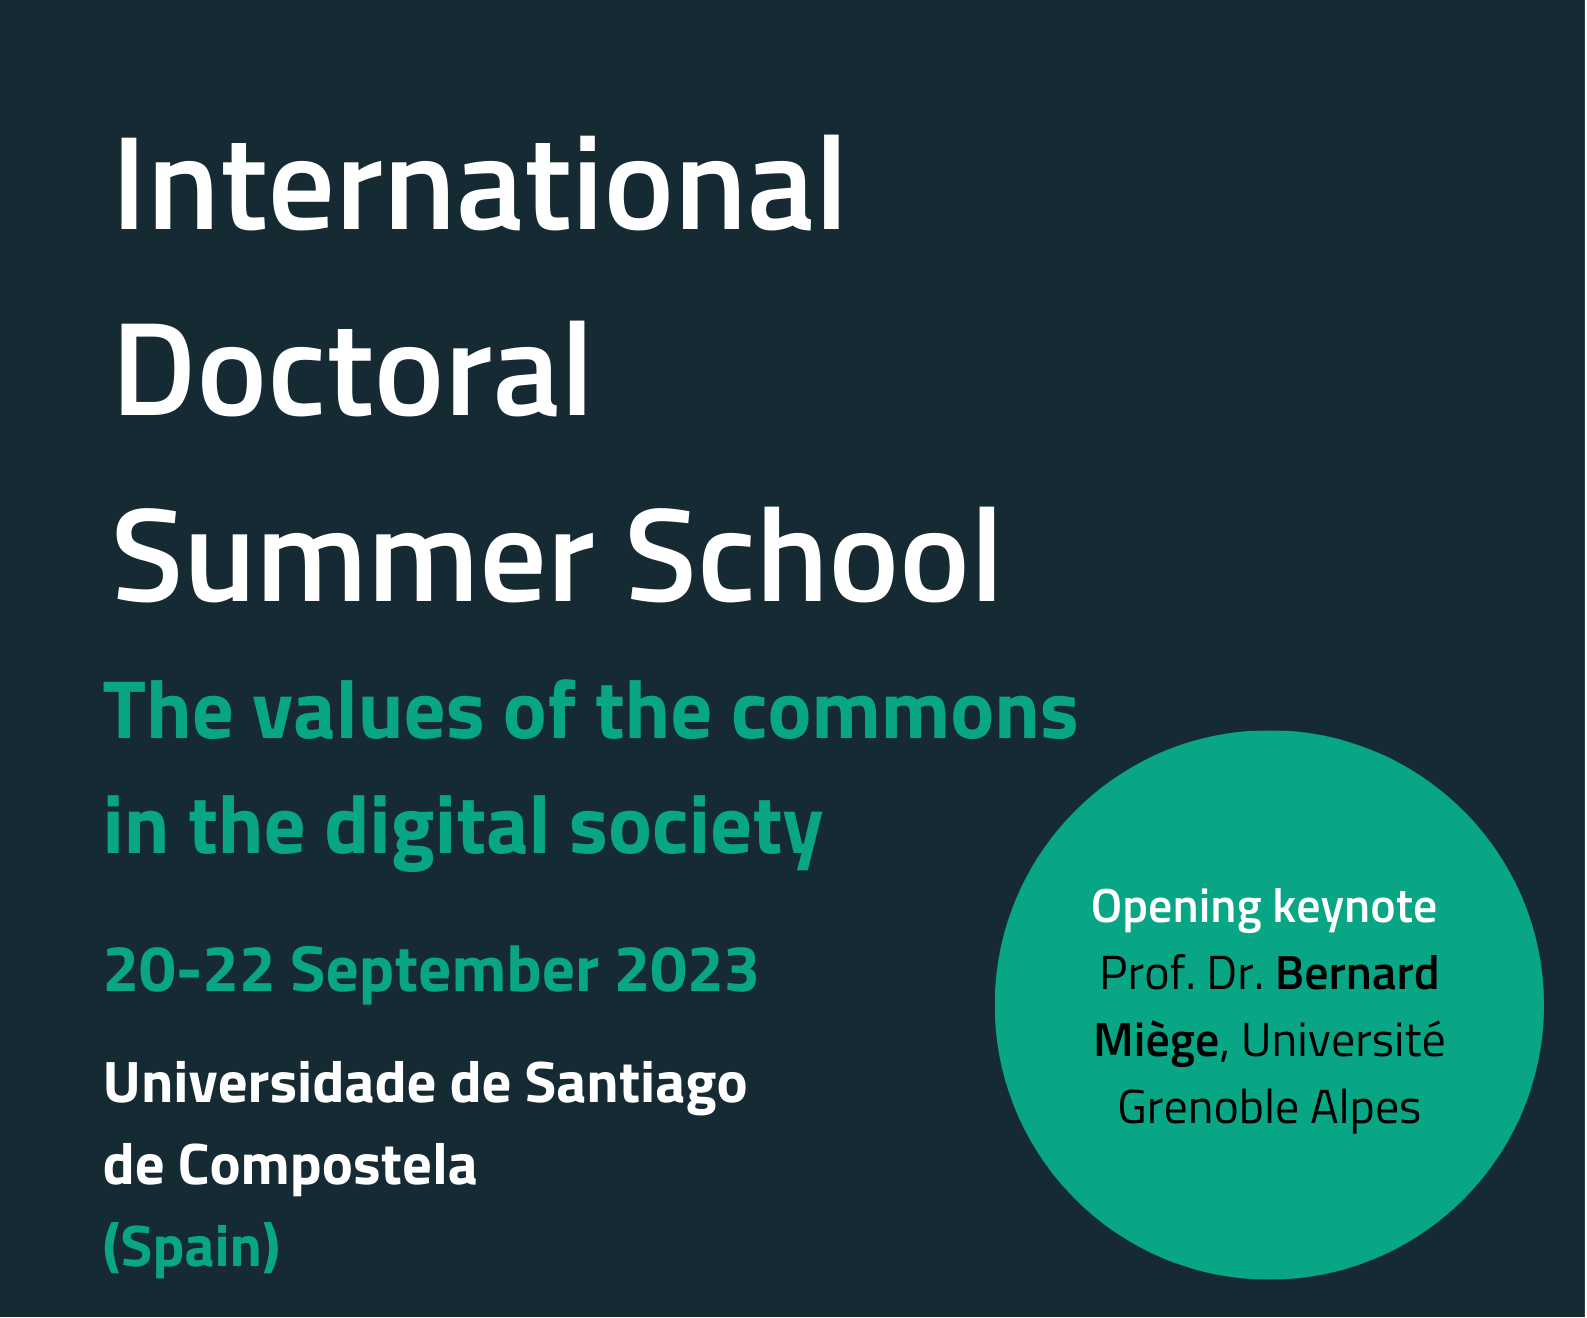 International Doctoral Summer School “The values of the commons in the digital society”